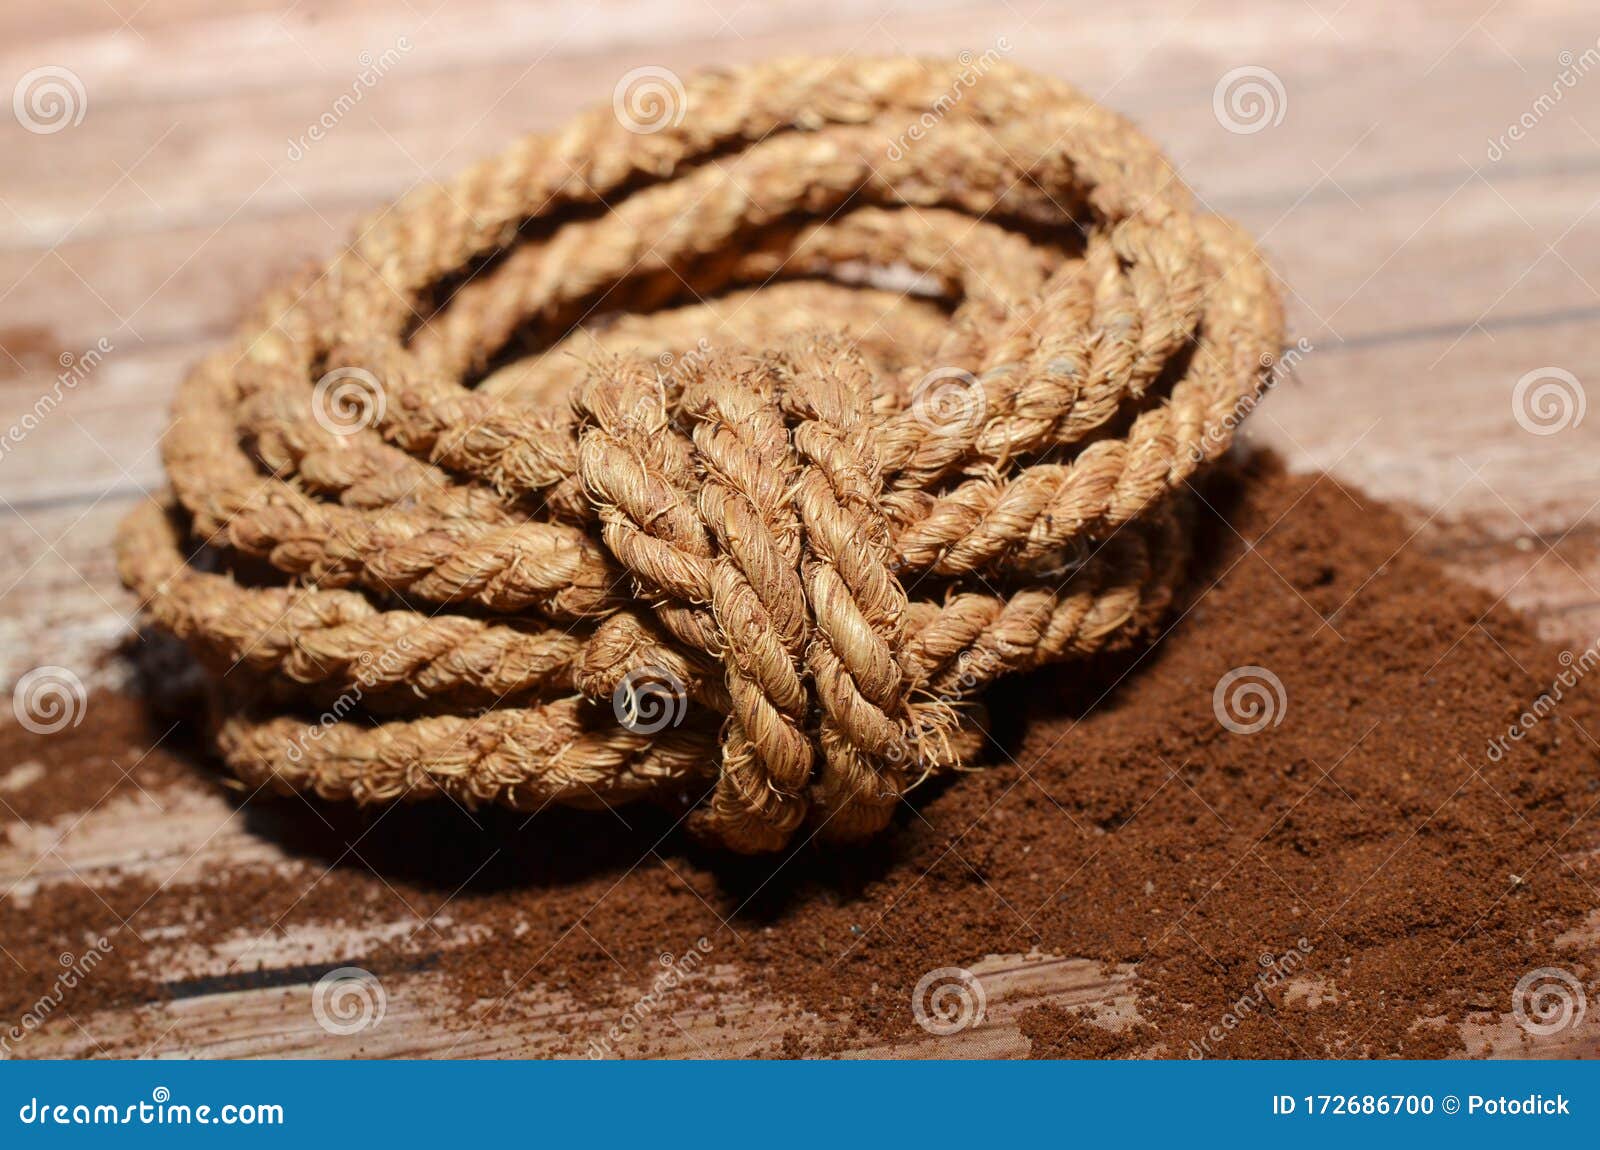 https://thumbs.dreamstime.com/z/rope-made-woven-wax-rattan-calamus-javensis-type-used-rigging-various-kinds-crafts-slightly-brown-color-172686700.jpg